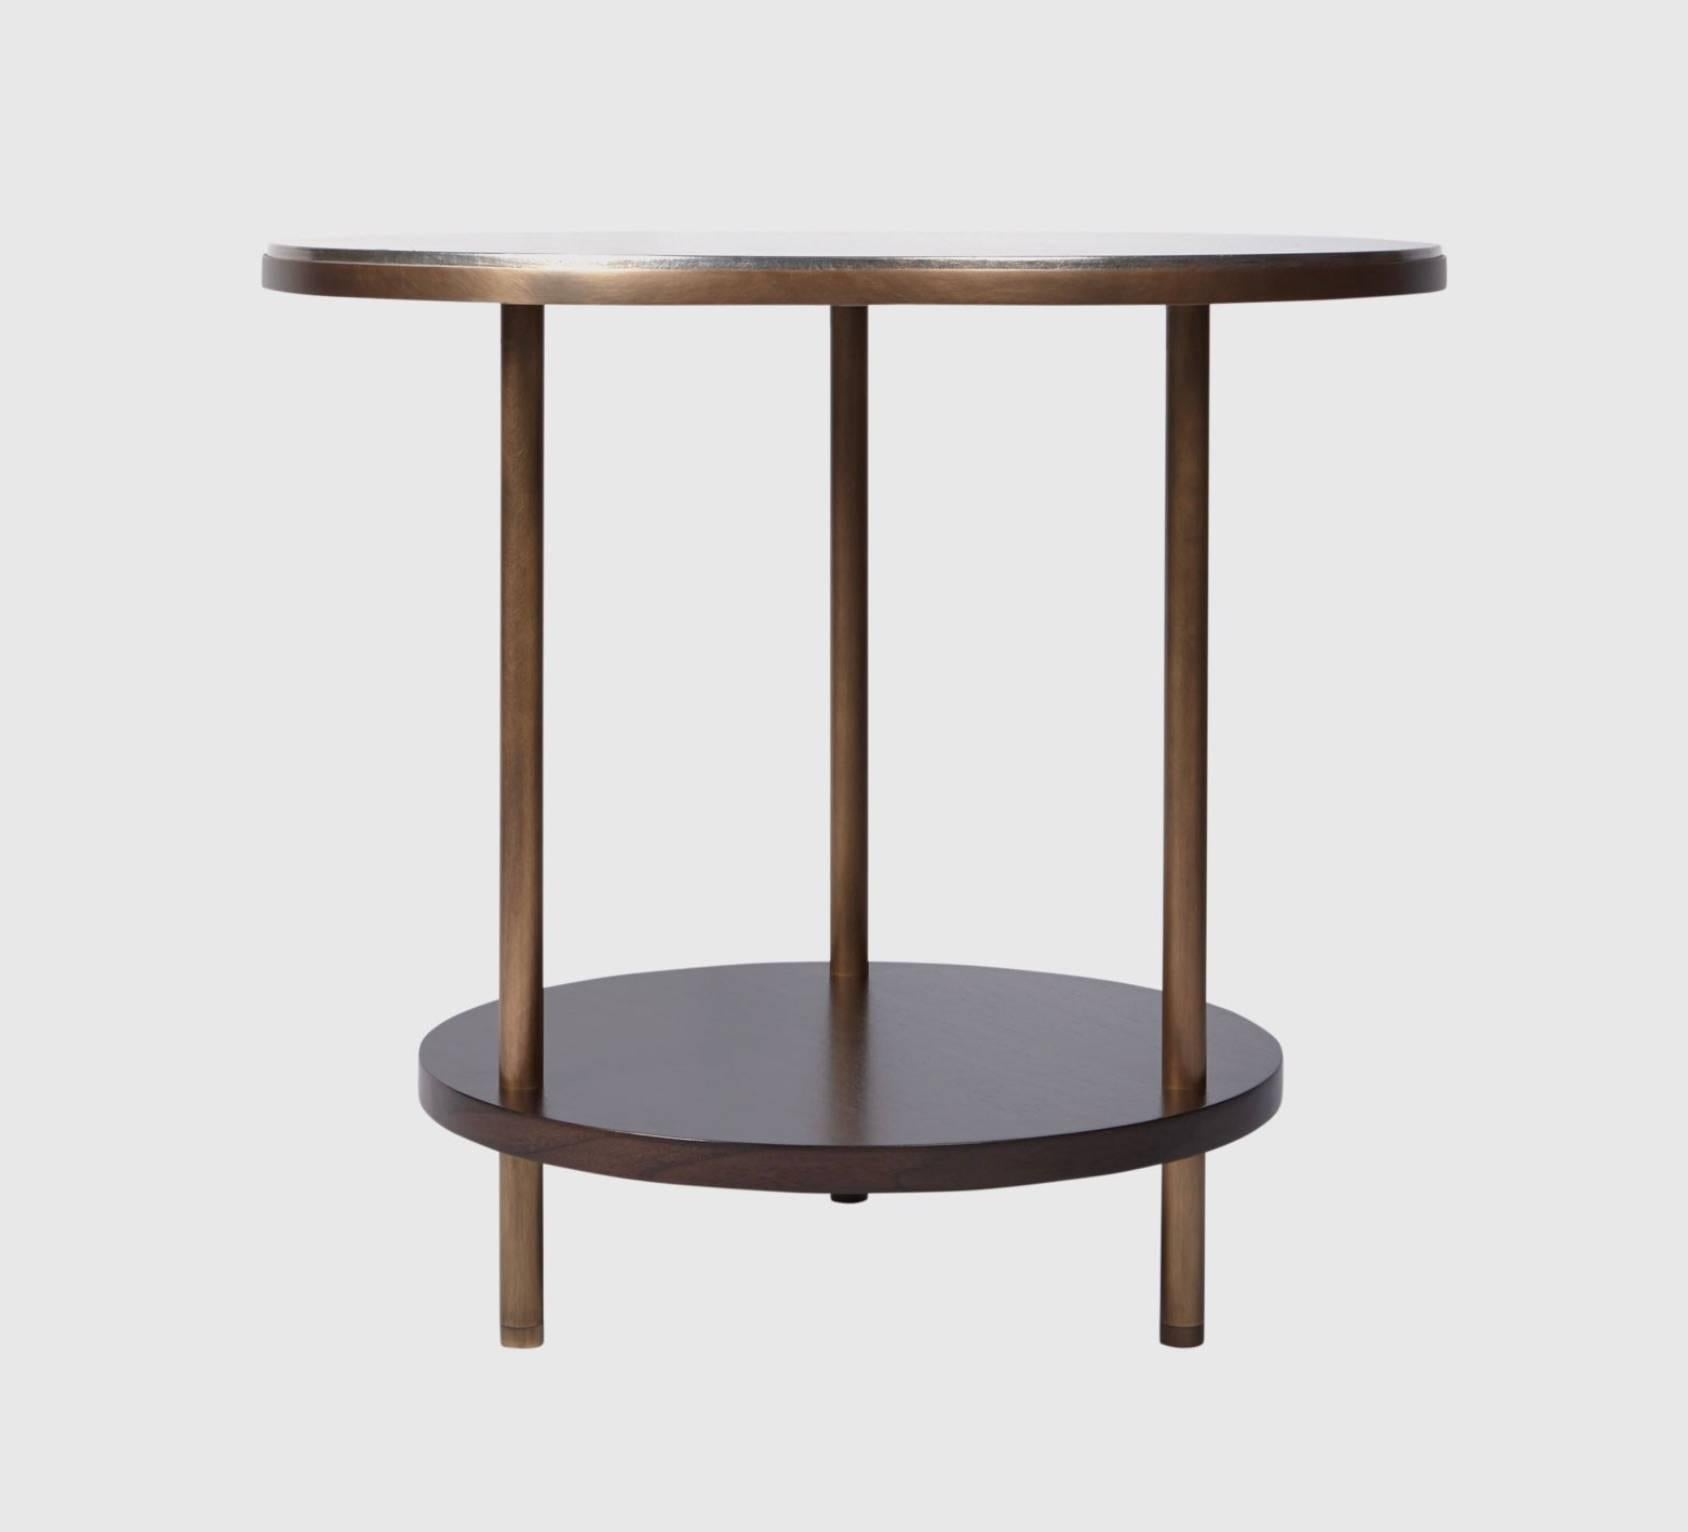 Osaka side table is a glamorous yet understated addition to any space. The sleekness and sophistication of this minimal side table may make you forget this pieces serves a functional purpose as well. An extensive knowledge of the qualities of